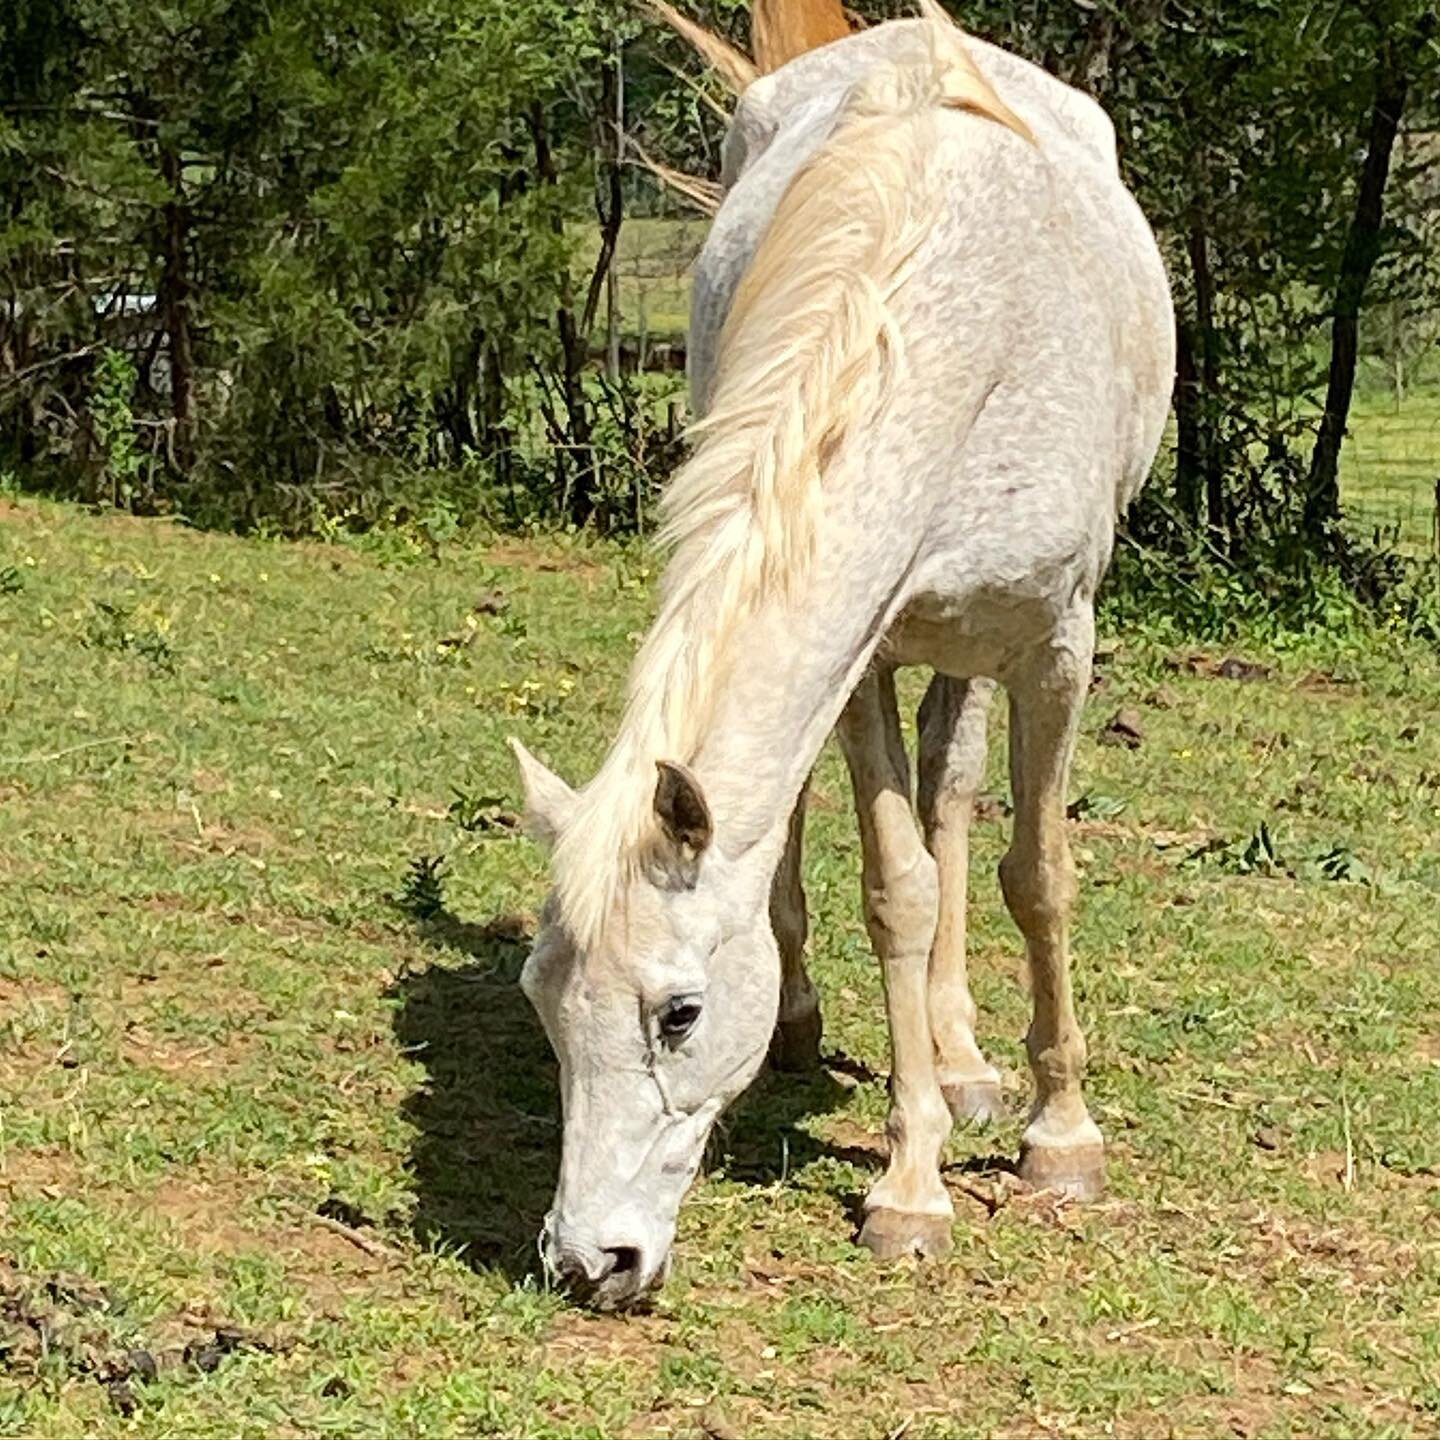 This beautiful May day brought to you by the three &ldquo;M&rsquo;s&rdquo;- Margaret, Mae and Marcos! How are you spending this lovely sunny day? 🌞 #horserescue #equinerescue #horsesofinstagram #maresofinstagram #rescuehorses #adoptable #may